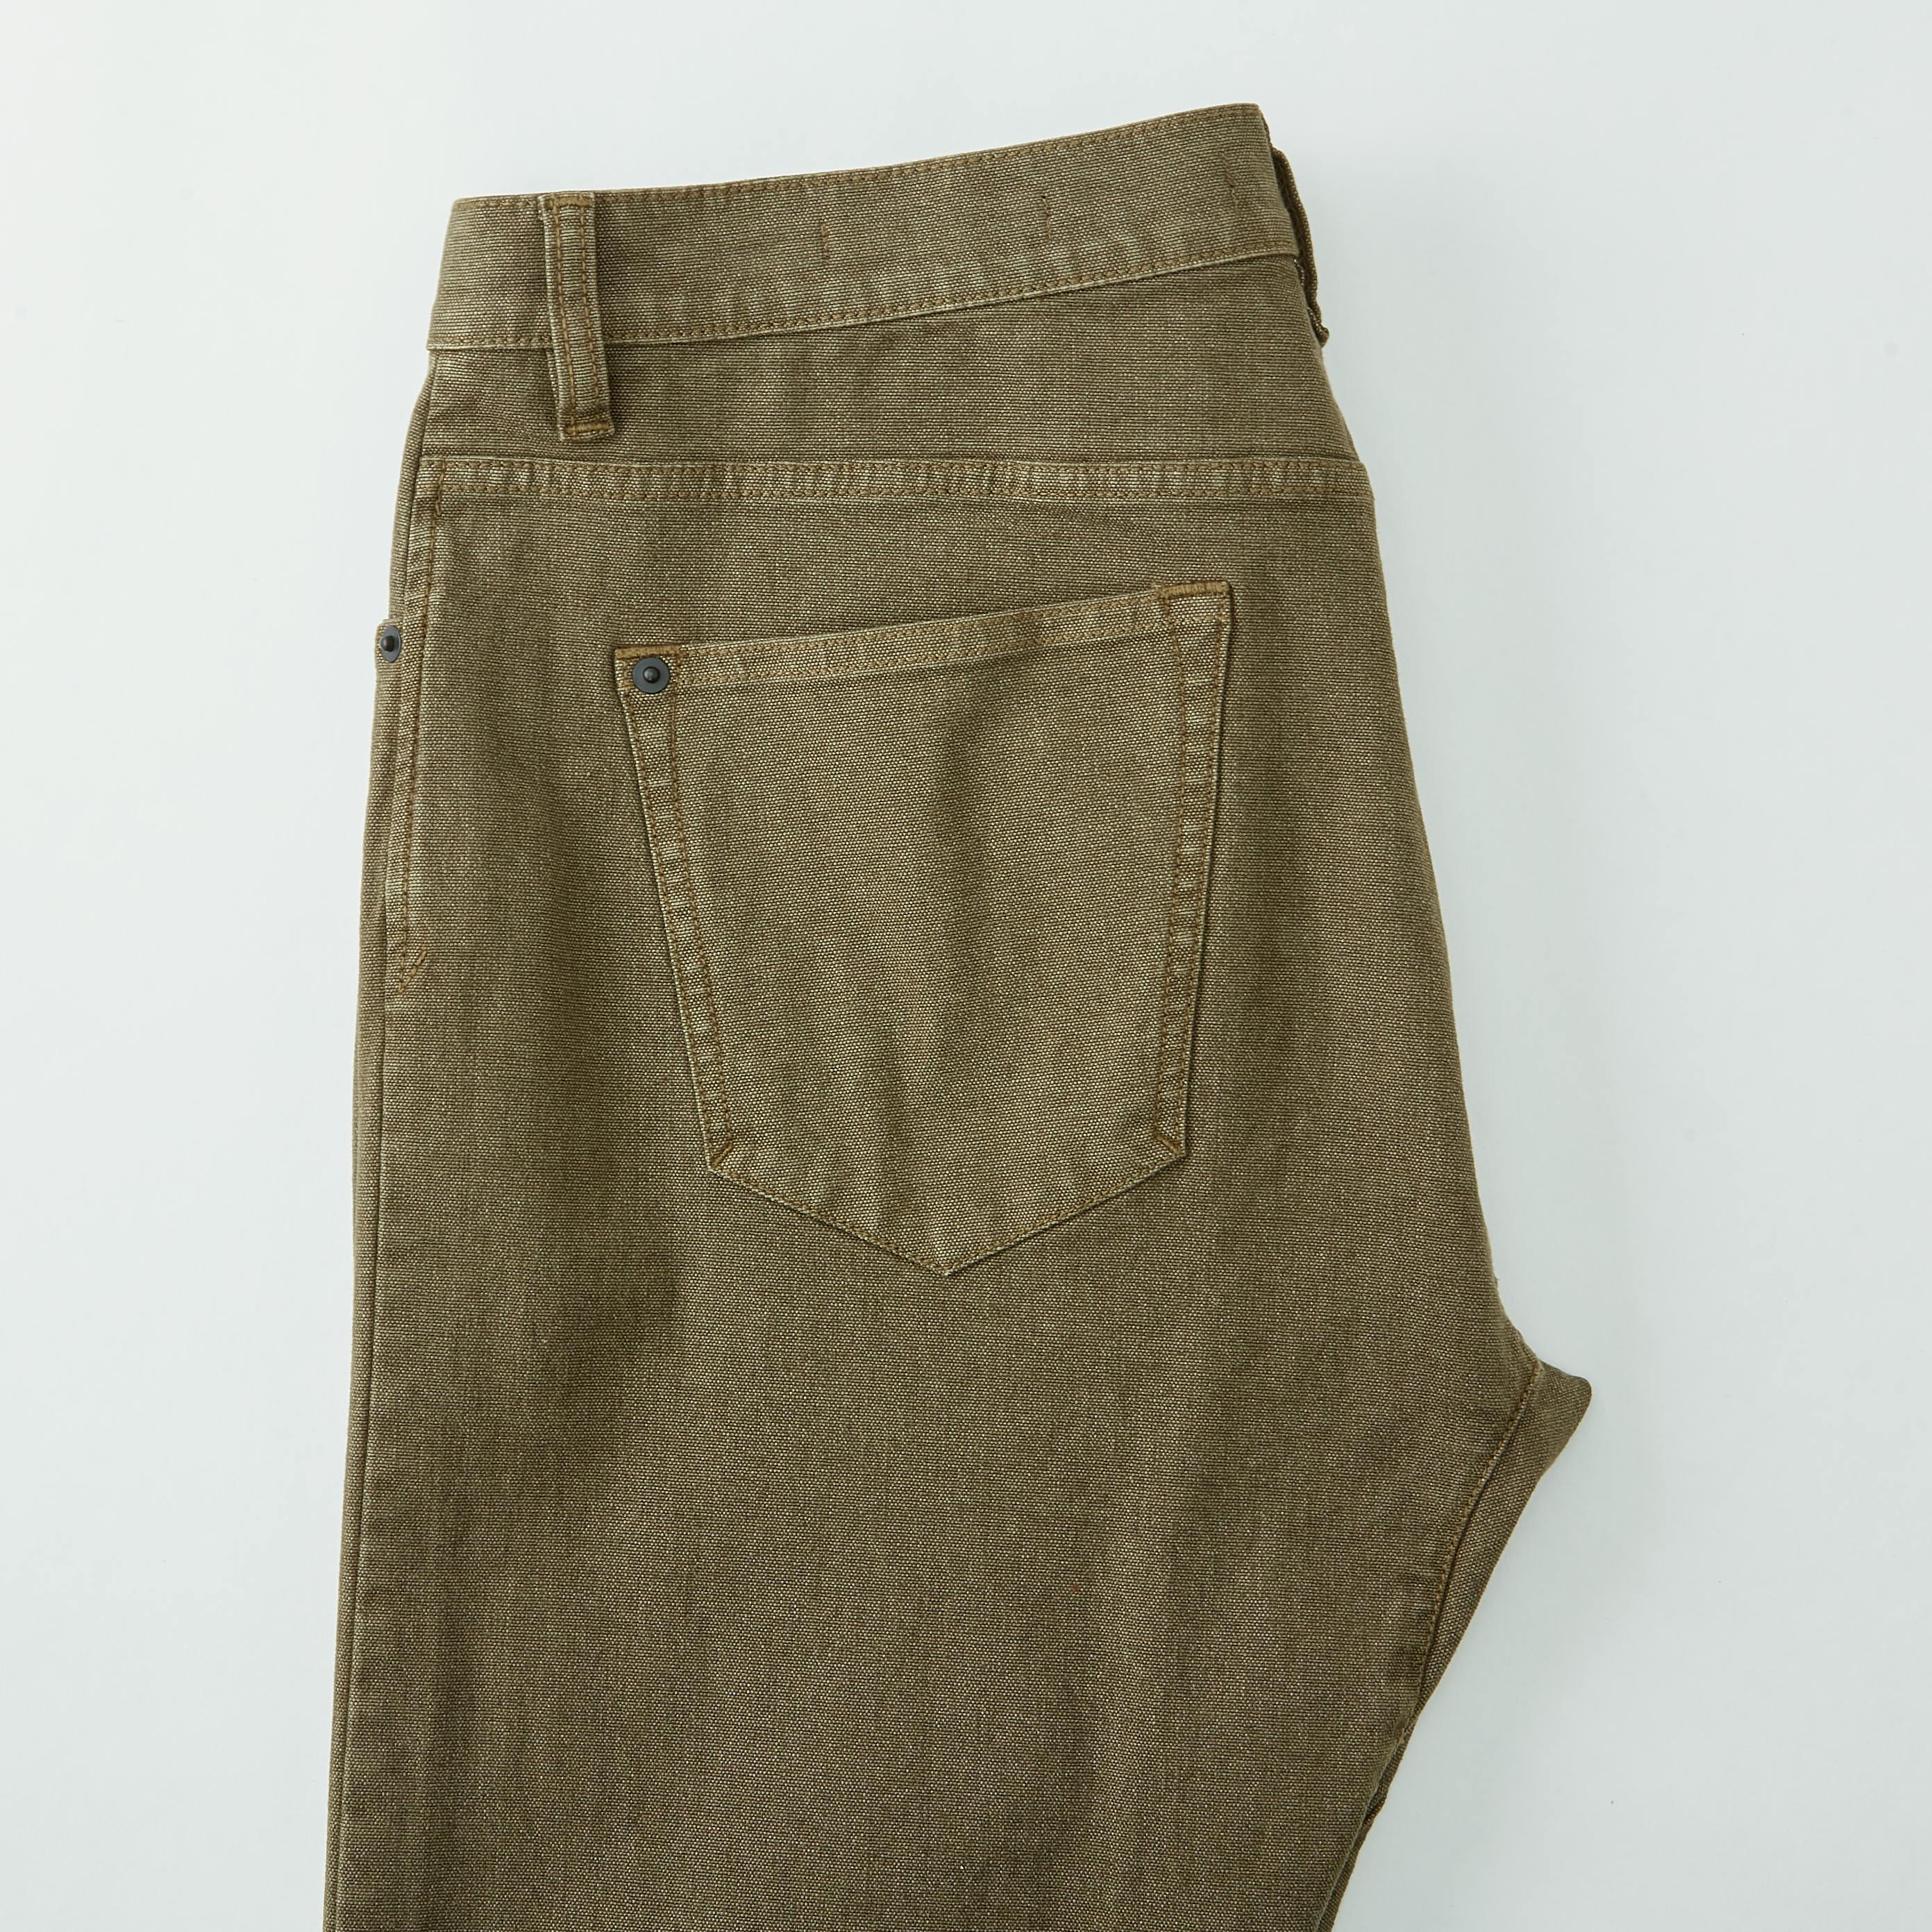 Proof Rover Pant - Straight